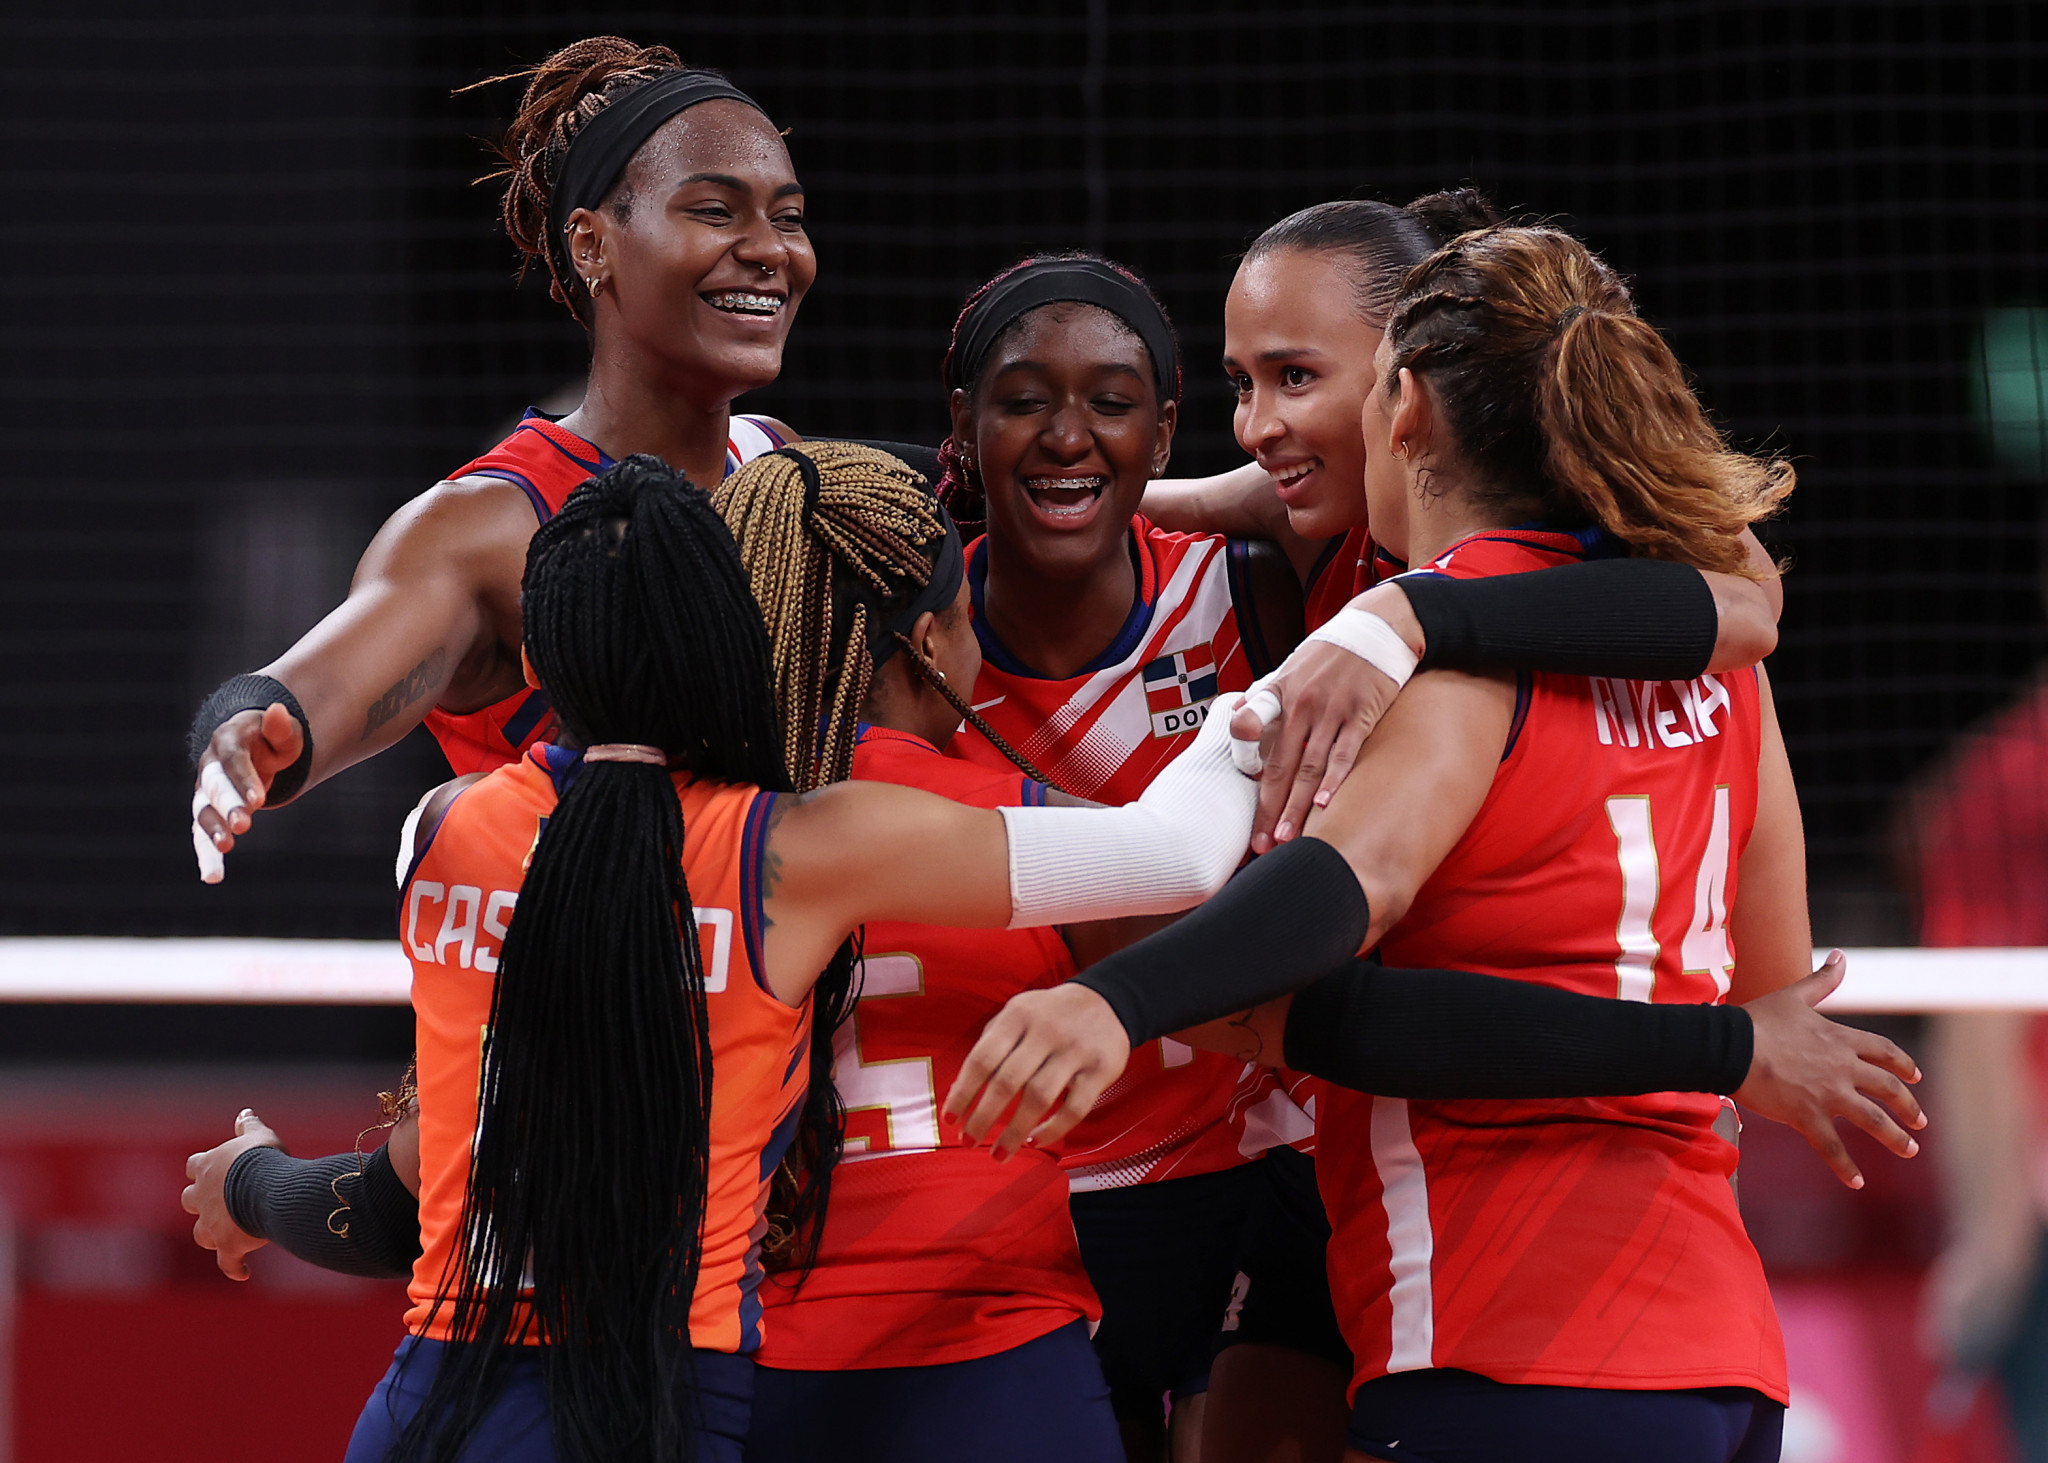 Dominican Republic to face Puerto Rico in volleyball's NORCECA Women's Continental Championship final